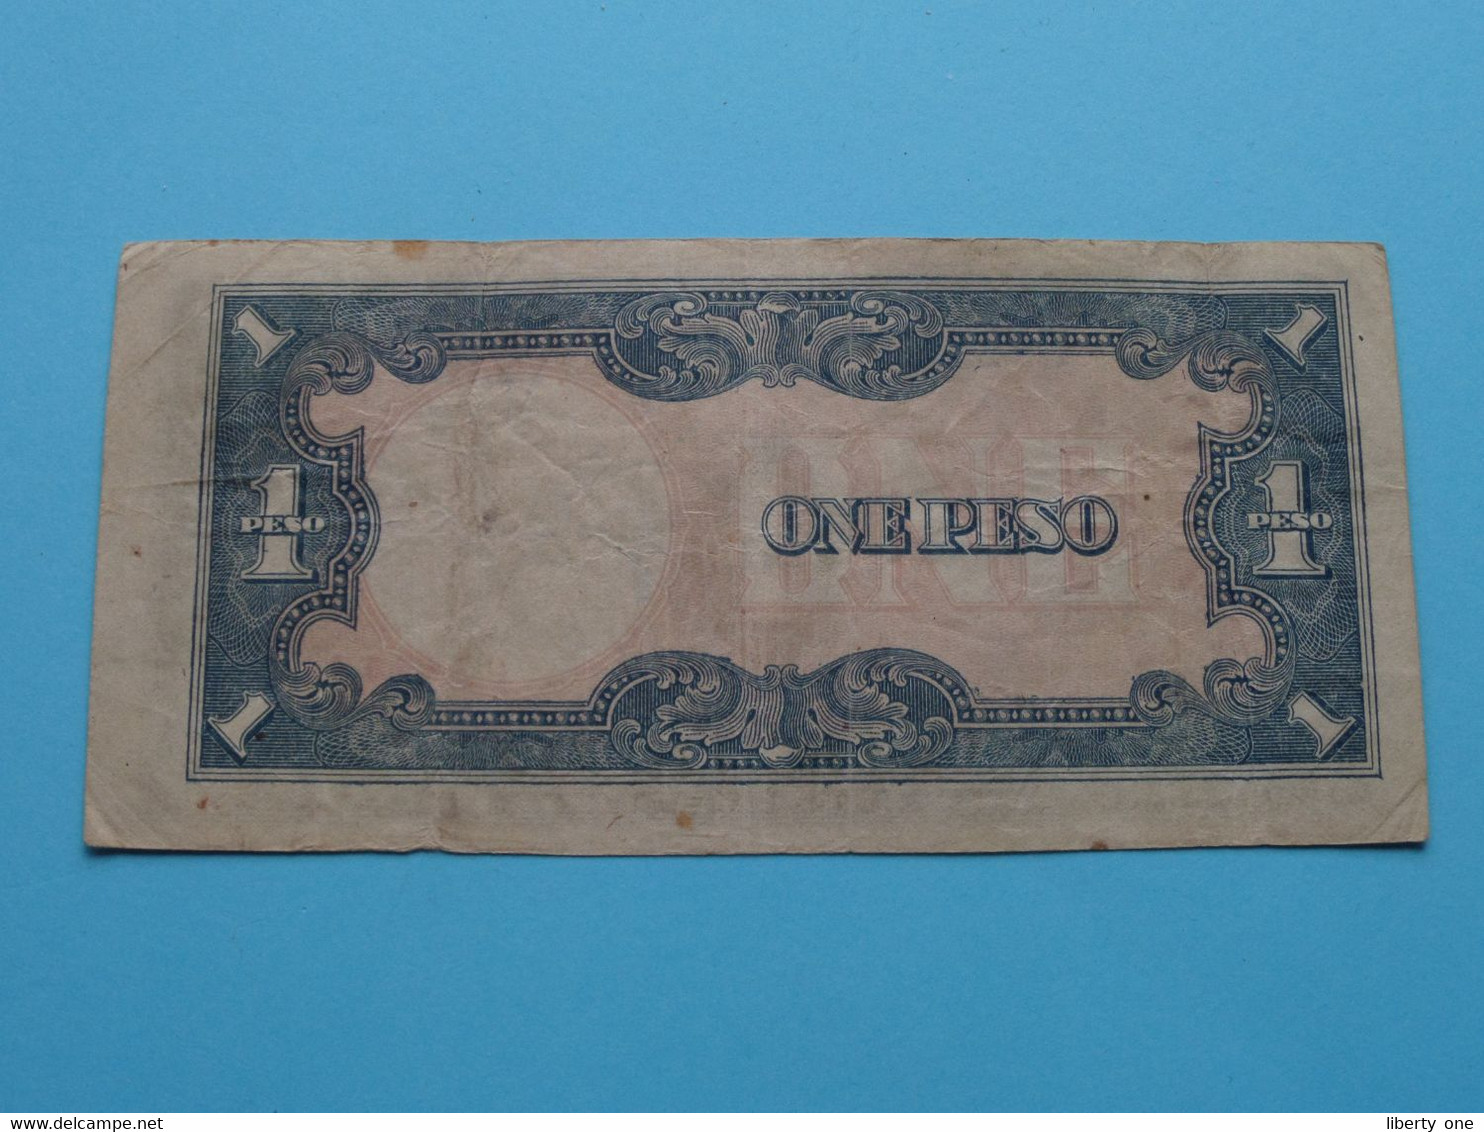 1 One Peso ( 64 - 0739434 ) The Japanese Government ( For Grade See SCAN ) Occupation / G ! - Philippines